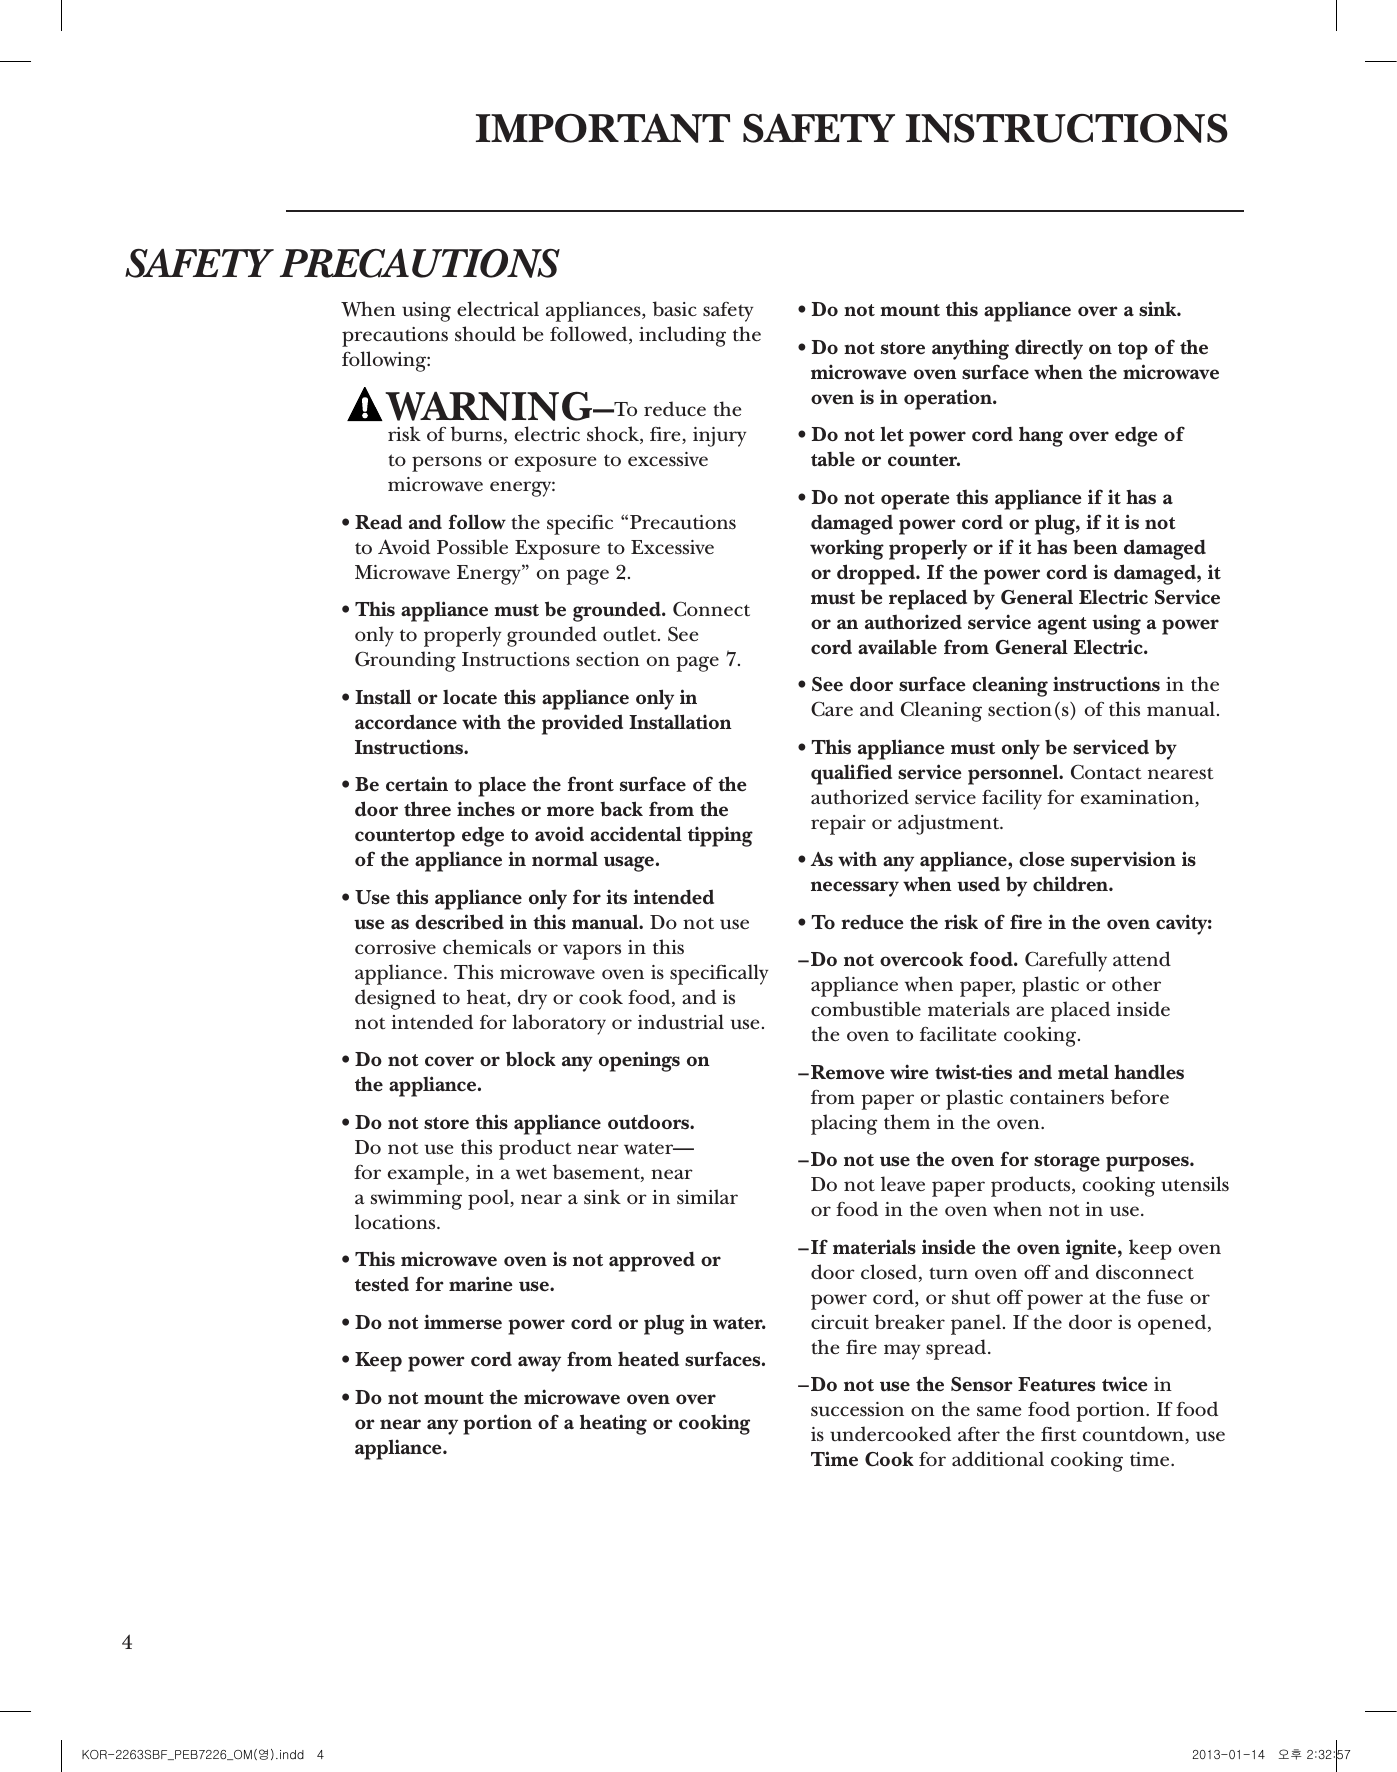 4IMPORTANT SAFETY INSTRUCTIONSSAFETY PRECAUTIONSWhen using electrical appliances, basic safetyprecautions should be followed, including thefollowing:WARNING–To reduce therisk of burns, electric shock, fire, injury to persons or exposure to excessivemicrowave energy:• Read and follow the specific ‘‘Precautions to Avoid Possible Exposure to ExcessiveMicrowave Energy’’ on page 2.• This appliance must be grounded. Connectonly to properly grounded outlet. SeeGrounding Instructions section on page 7.• Install or locate this appliance only inaccordance with the provided InstallationInstructions.• Be certain to place the front surface of thedoor three inches or more back from thecountertop edge to avoid accidental tippingof the appliance in normal usage. • Use this appliance only for its intended use as described in this manual. Do not usecorrosive chemicals or vapors in thisappliance. This microwave oven is specificallydesigned to heat, dry or cook food, and is not intended for laboratory or industrial use.• Do not cover or block any openings on the appliance.• Do not store this appliance outdoors.Do not use this product near water—for example, in a wet basement, near a swimming pool, near a sink or in similarlocations.• This microwave oven is not approved ortested for marine use.• Do not immerse power cord or plug in water.• Keep power cord away from heated surfaces.• Do not mount the microwave oven over or near any portion of a heating or cookingappliance.• Do not mount this appliance over a sink.• Do not store anything directly on top of themicrowave oven surface when the microwaveoven is in operation.• Do not let power cord hang over edge oftable or counter.• Do not operate this appliance if it has adamaged power cord or plug, if it is notworking properly or if it has been damaged or dropped. If the power cord is damaged, itmust be replaced by General Electric Serviceor an authorized service agent using a powercord available from General Electric.• See door surface cleaning instructions in theCare and Cleaning section(s) of this manual.• This appliance must only be serviced byqualified service personnel. Contact nearestauthorized service facility for examination, repair or adjustment.• As with any appliance, close supervision isnecessary when used by children.• To reduce the risk of fire in the oven cavity:–Do not overcook food. Carefully attendappliance when paper, plastic or othercombustible materials are placed inside the oven to facilitate cooking.–Remove wire twist-ties and metal handlesfrom paper or plastic containers beforeplacing them in the oven.–Do not use the oven for storage purposes. Do not leave paper products, cooking utensilsor food in the oven when not in use.–If materials inside the oven ignite, keep ovendoor closed, turn oven off and disconnectpower cord, or shut off power at the fuse orcircuit breaker panel. If the door is opened,the fire may spread.–Do not use the Sensor Features twice insuccession on the same food portion. If foodis undercooked after the first countdown, useTime Cook for additional cooking time.r Operating the microwave with no food insidefor more than a minute or two may causedamage to the oven and could start a re.It increases the heat around the magnetronand can shorten the life of the oven.r Hot foods and steam can cause burns.Be careful when opening any containers ofhot food, including popcorn bags, cookingpouches and boxes. To prevent possibleinjury, direct steam away from hands and face.r Foods with unbroken outer ‘‘skin’’ such aspotatoes, sausages, tomatoes, apples, chickenlivers and other giblets and egg yolks shouldbe pierced to allow steam to escape duringcooking.• Do not overcook potatoes. They coulddehydrate and catch re, causing damage to your oven.• Some products such as whole eggs and sealed containers—for example, closed jars—are able to explode and should not be heatedin this microwave oven. Such use of themicrowave oven could result in injury.• Do not boil eggs in a microwave oven.Pressure will build up inside egg yolk and willcause it to burst, possibly resulting in injury.• Avoid heating baby food in glass jars, even with the lid off. Make sure all infant food isthoroughly cooked. Stir food to distribute the heat evenly. Be careful to preventscalding when warming formula. Thecontainer may feel cooler than the formulareally is. Always test the formula beforefeeding the baby.• Do not defrost frozen beverages in narrow-necked bottles(especially carbonatedbeverages). Even if the container is opened,pressure can build up. This can cause thecontainer to burst, possibly resulting in injury.SAFETY FACT—Superheated water. Liquids, such as water, coffee or tea, are ableto be overheated beyond the boiling pointwithout appearing to be boiling. Visiblebubbling or boiling when the container isremoved from the microwave oven is notalways present. THIS COULD RESULT INVERY HOT LIQUIDS SUDDENLY BOILINGOVER WHEN THE CONTAINER ISDISTURBED OR A SPOON OR OTHERUTENSIL IS INSERTED INTO THE LIQUID.To reduce the risk of injury to persons:– Do not overheat the liquid.– Stir the liquid both before and halfwaythrough heating it.– Do not use straight-sided containers withnarrow necks.– After heating, allow the container to standin the microwave oven for a short timebefore removing the container.– Use extreme care when inserting a spoon orother utensil into the container.r Cook meat and poultry thoroughly—meat to at least an INTERNAL temperature of 160°Fand poultry to at least an INTERNALtemperature of 180°F. Cooking to thesetemperatures usually protects againstfoodborne illness.r Do not pop popcorn in your microwave ovenunless it is in a special microwave popcornaccessory or unless you use popcorn labeledfor use in microwave ovens.5FOODSARCING If you see arcing, press the CANCEL/OFF padand correct the problem.Arcing is the microwave term for sparks in theoven. Arcing is caused by:r Metal or foil touching the side of the oven.r Foil not molded to food (upturned edges actlike antennas).r Metal, such as twist-ties, poultry pins or gold-rimmed dishes in the microwave.r Recycled paper towels containing small metalpieces being used in the microwave.KOR-2263SBF_PEB7226_OM(영).indd   4 2013-01-14   오후 2:32:57